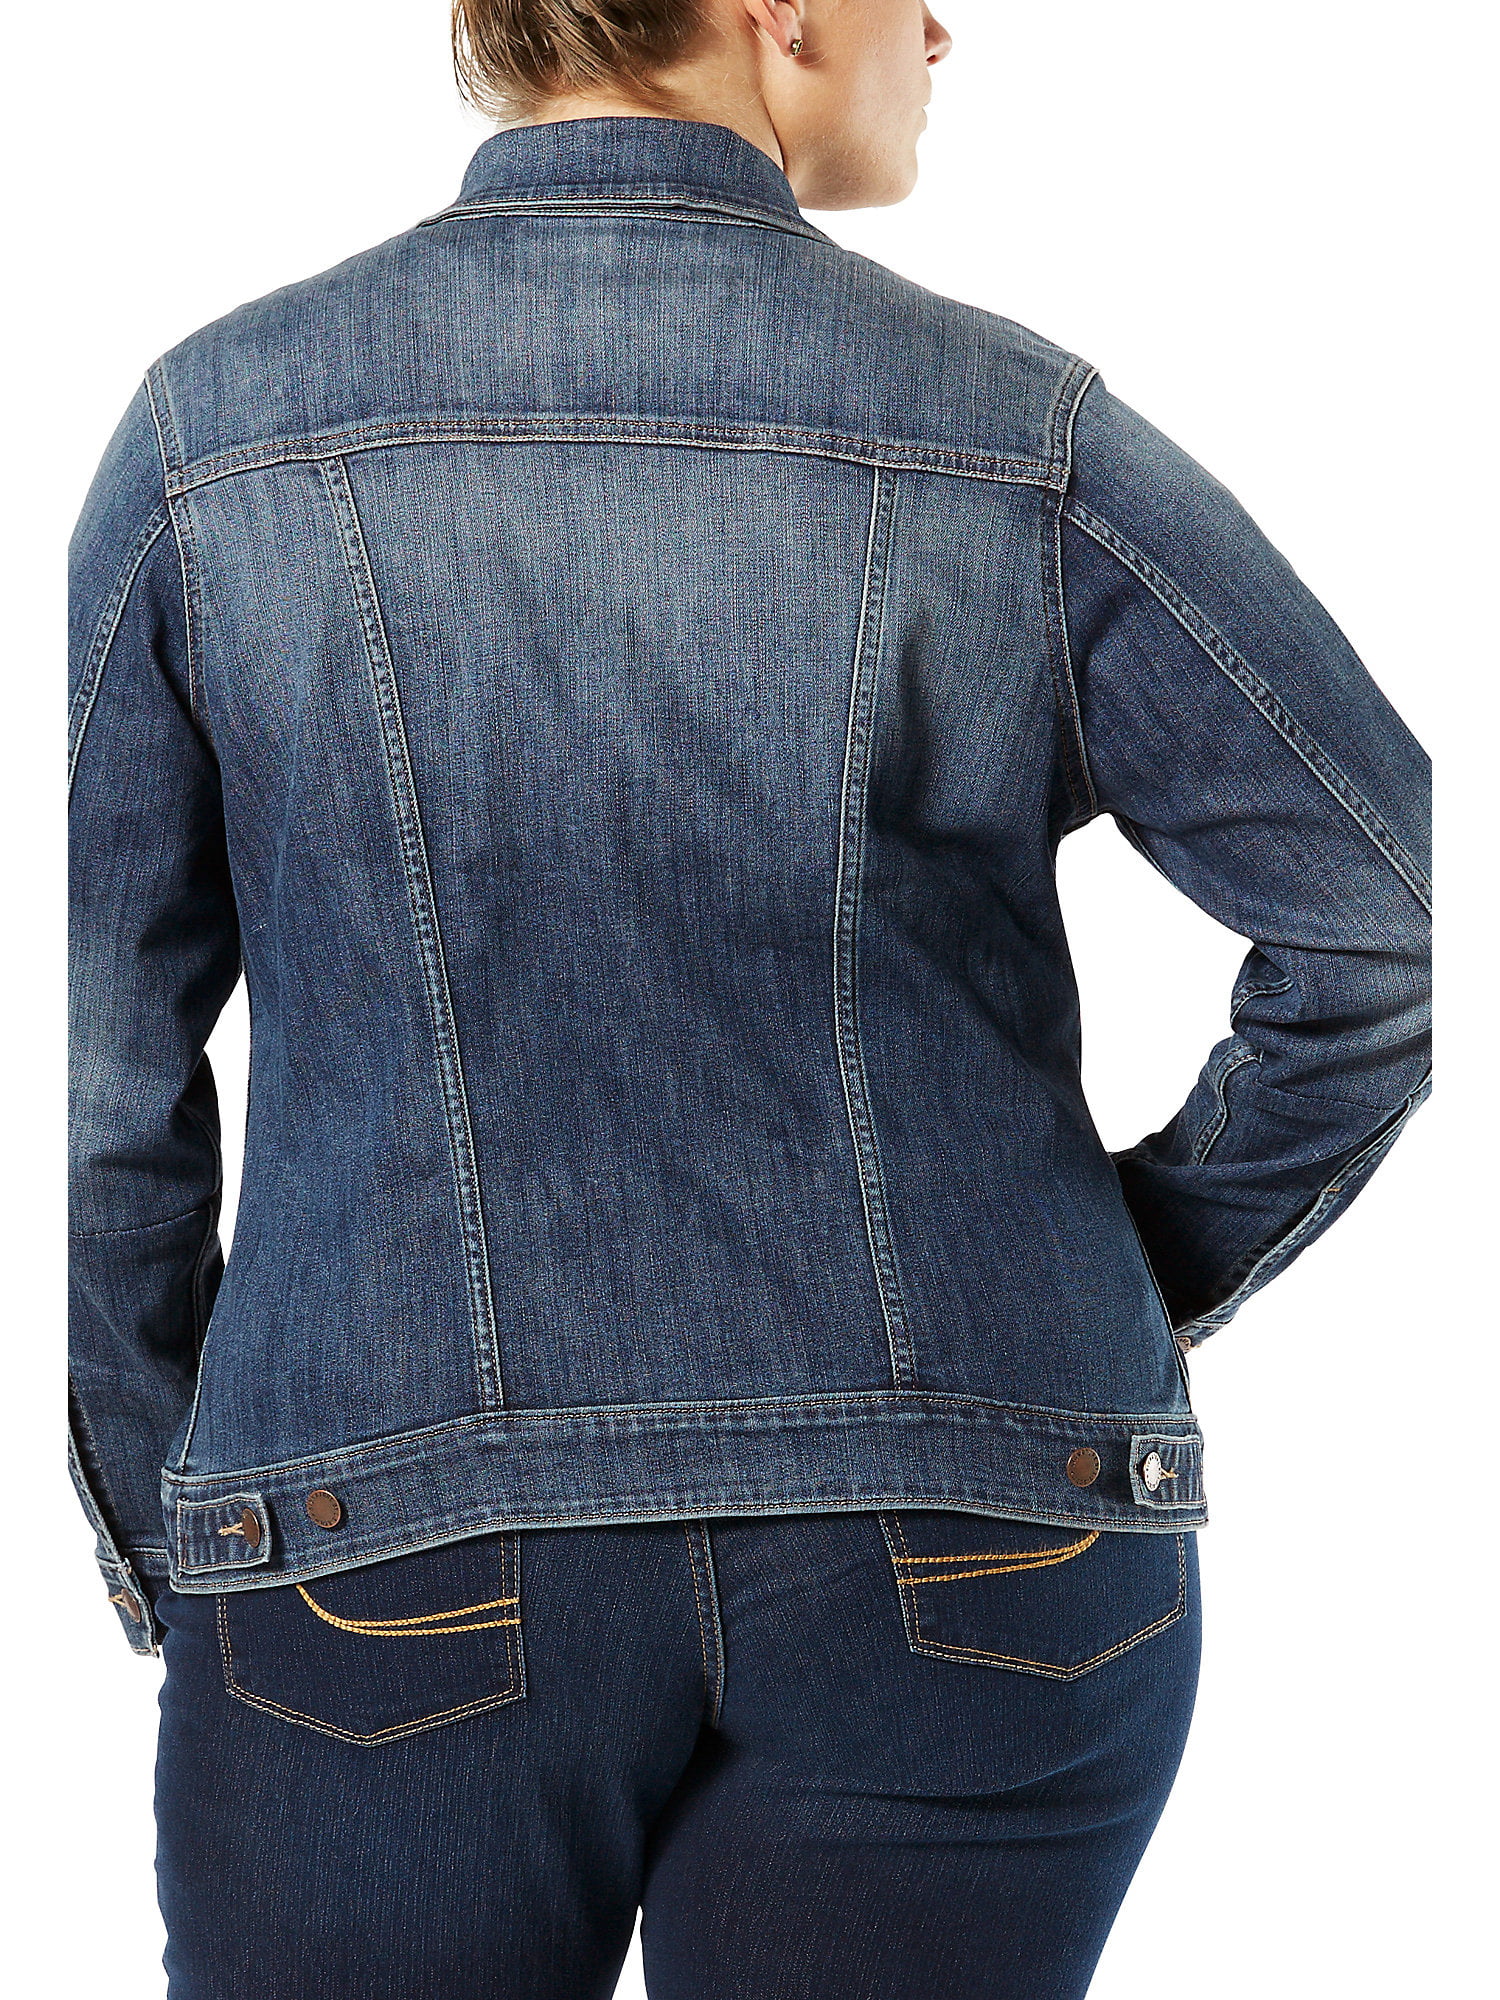 Love in London for the Levi's® Trucker Jacket - Levi Strauss & Co : Levi  Strauss & Co